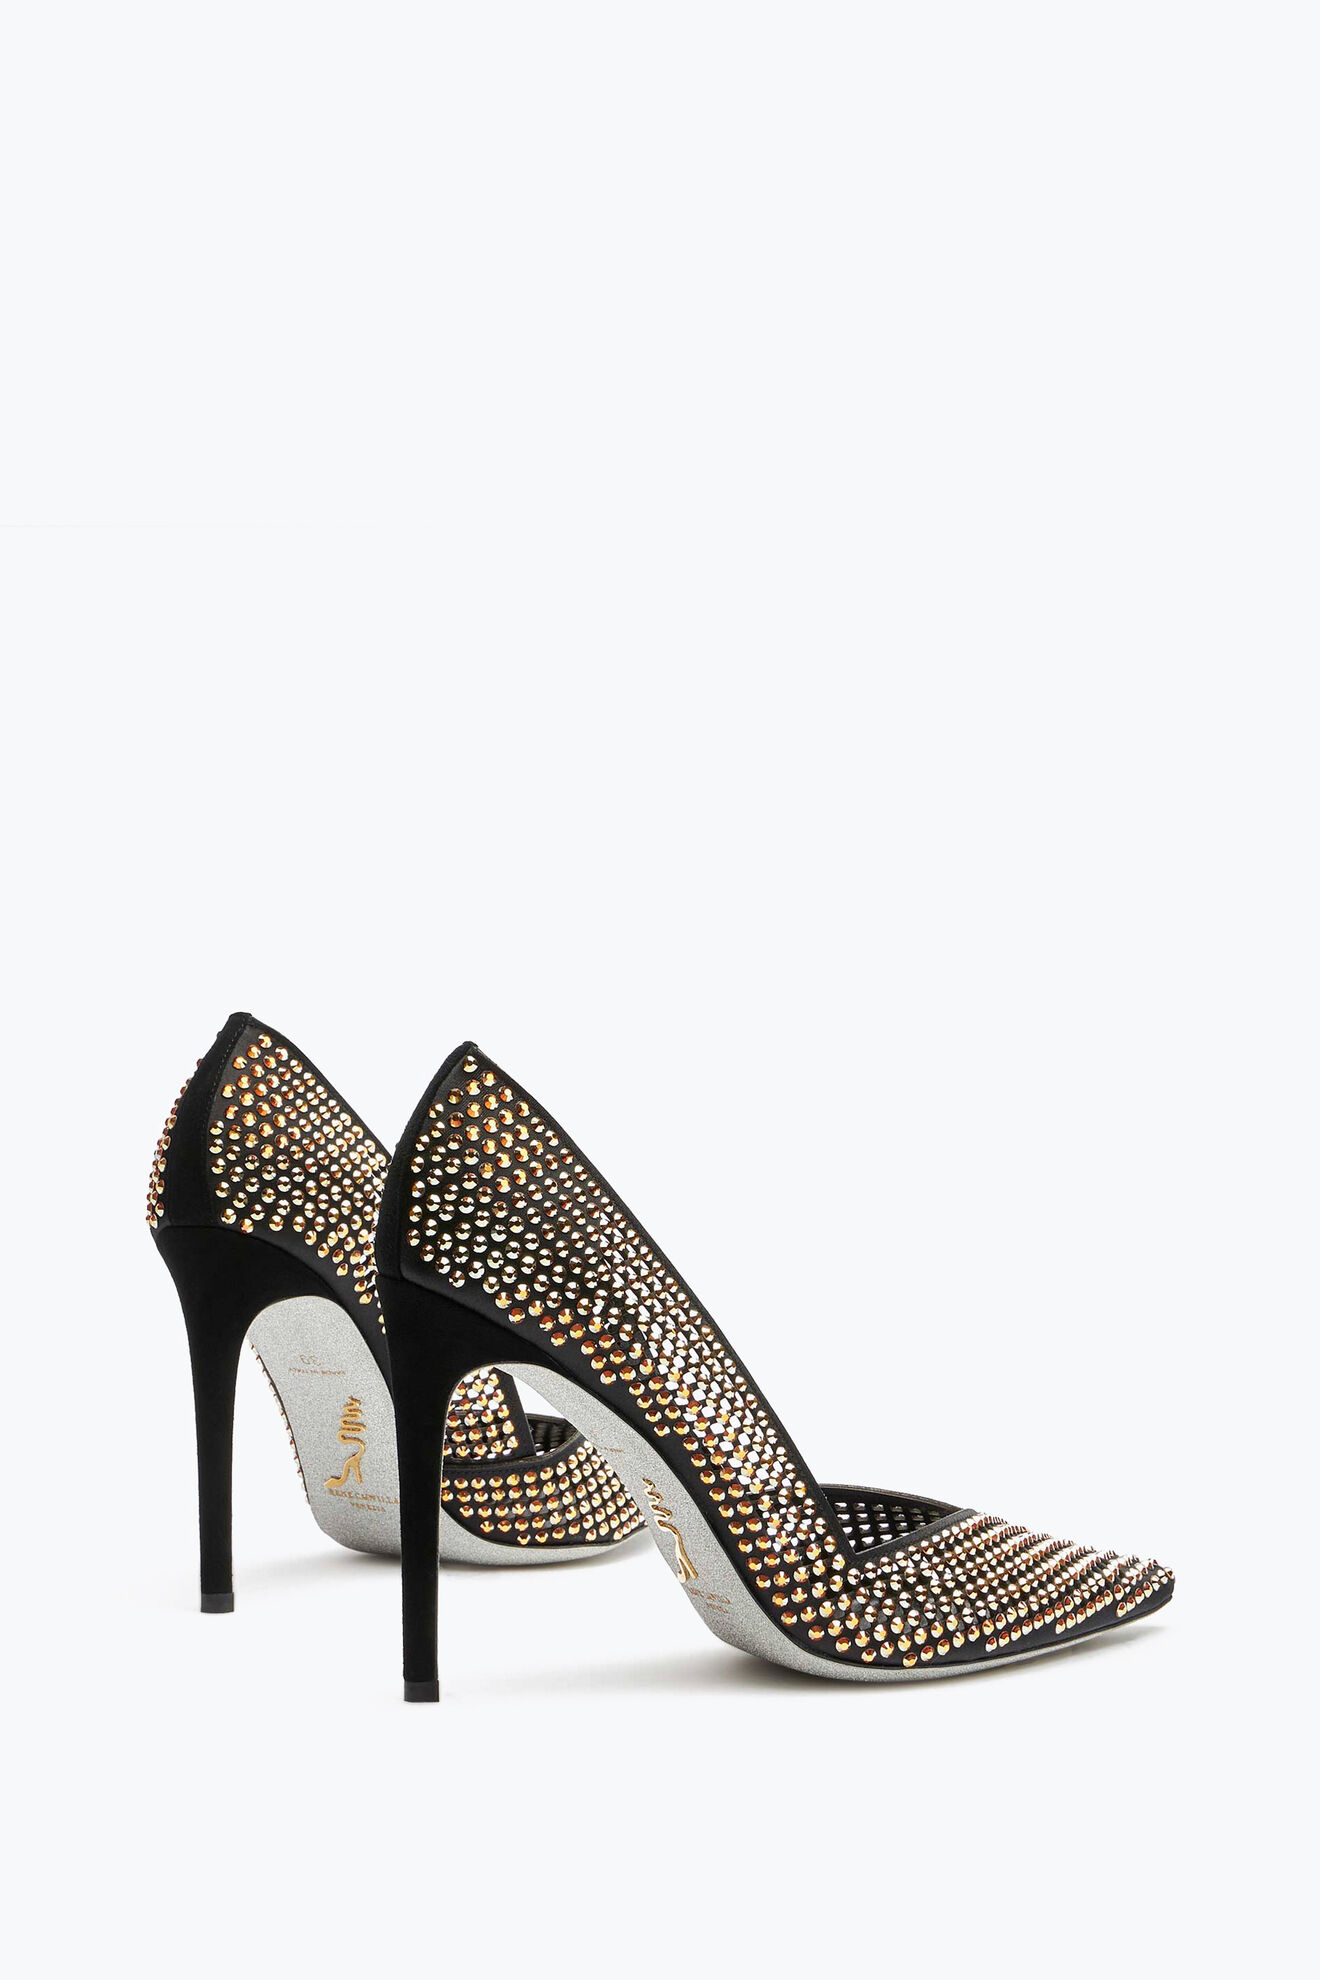 Ginger Black Décolleté With Metallic Crystals 105 Pumps in Black for ...